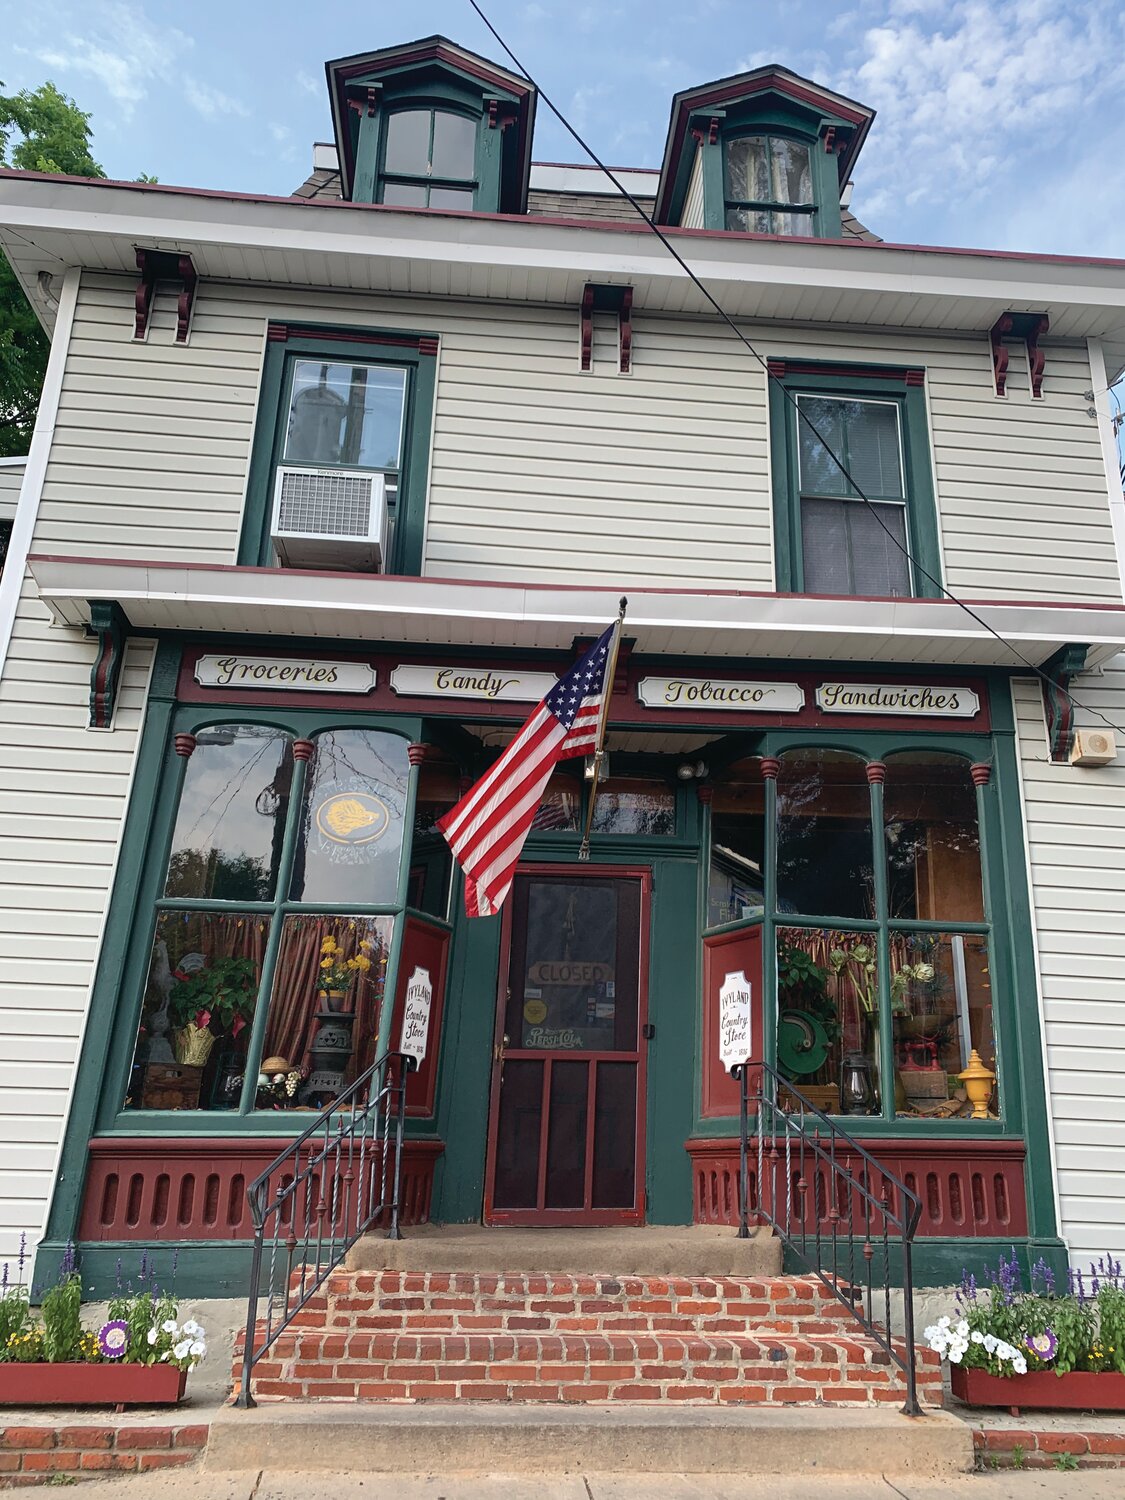 The Ivyland Country Store leans slightly to the right. And that’s just part of its much-storied charm.